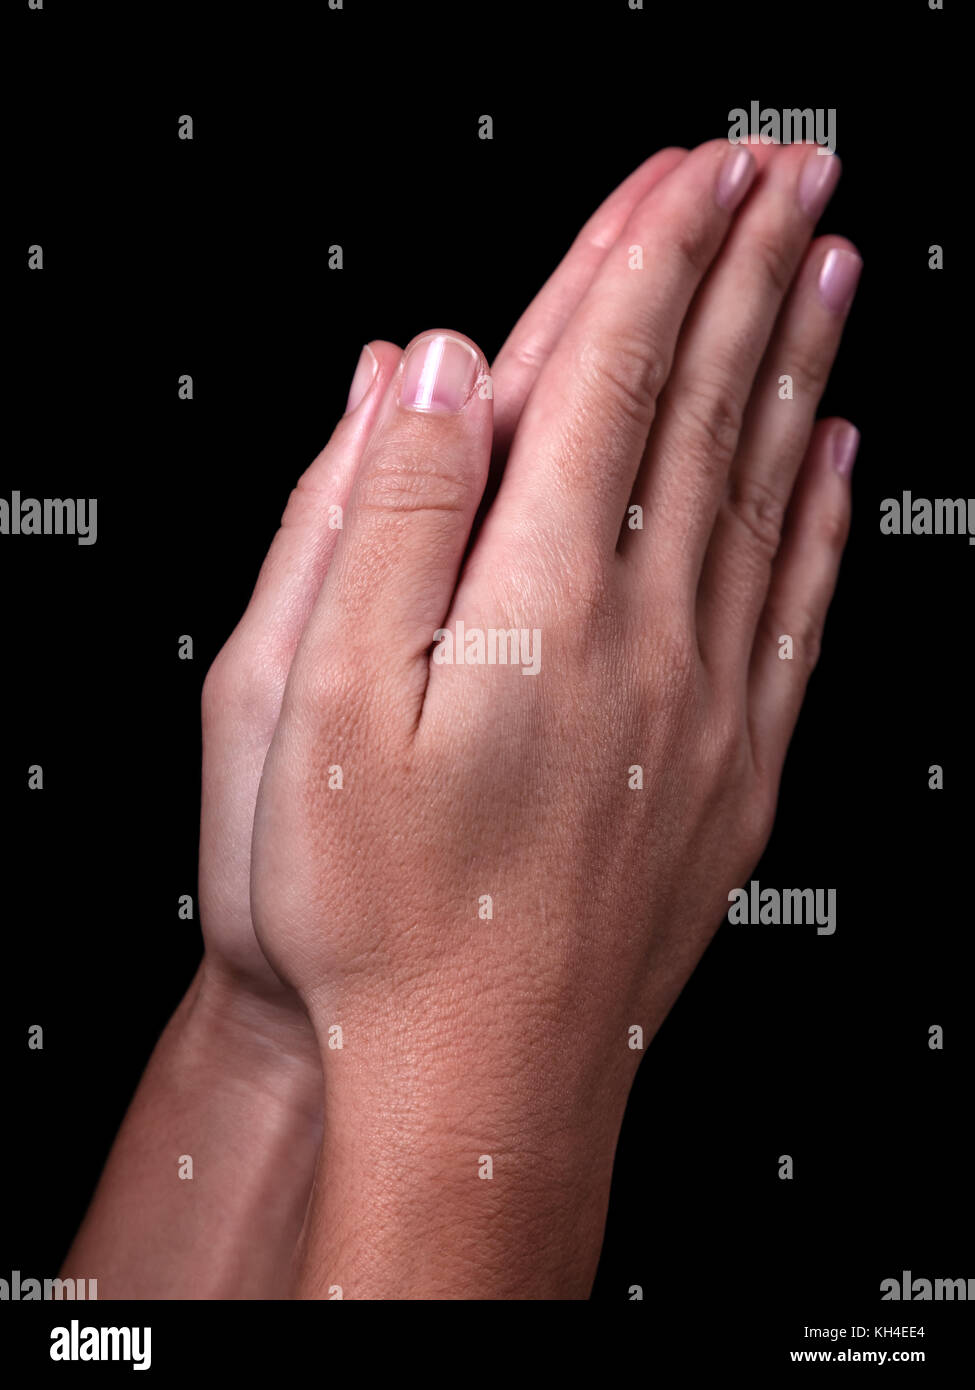 Female hands praying with palms together. Black background. Close up of woman hand. Concept for prayer, pray, faith, religion, religious, worship Stock Photo